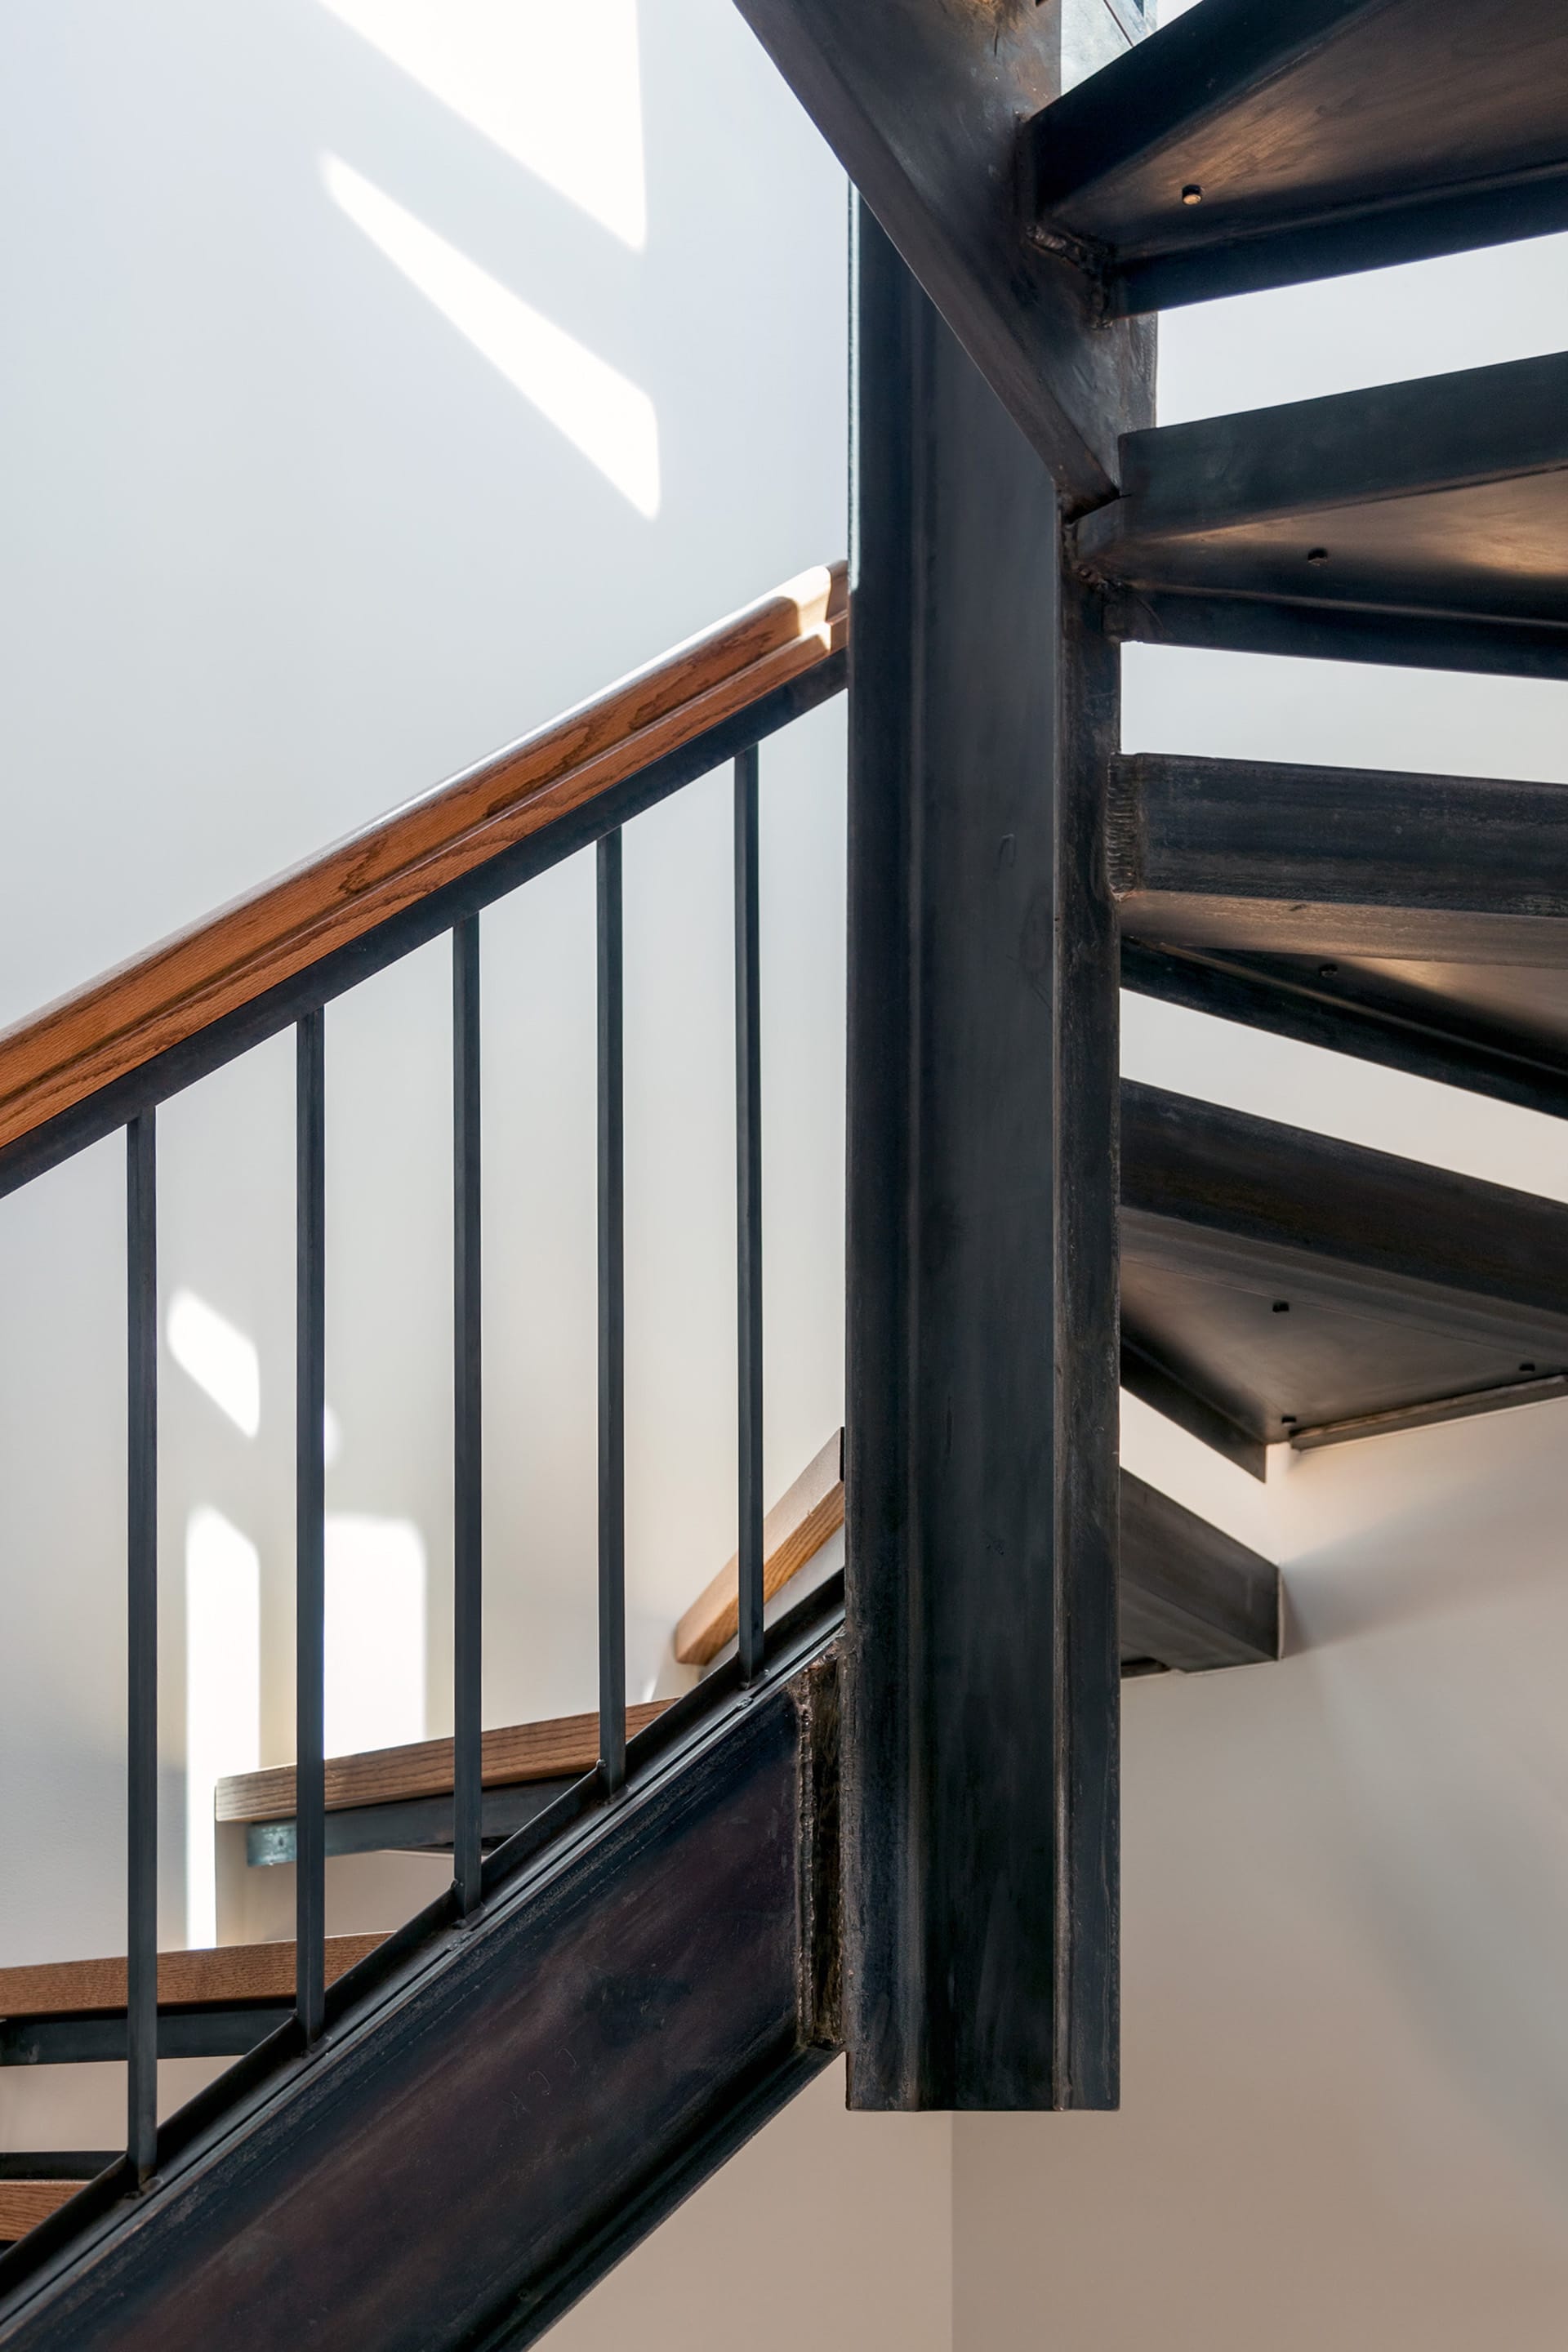 Open stringer, open riser staircase with wood handrail and treads.